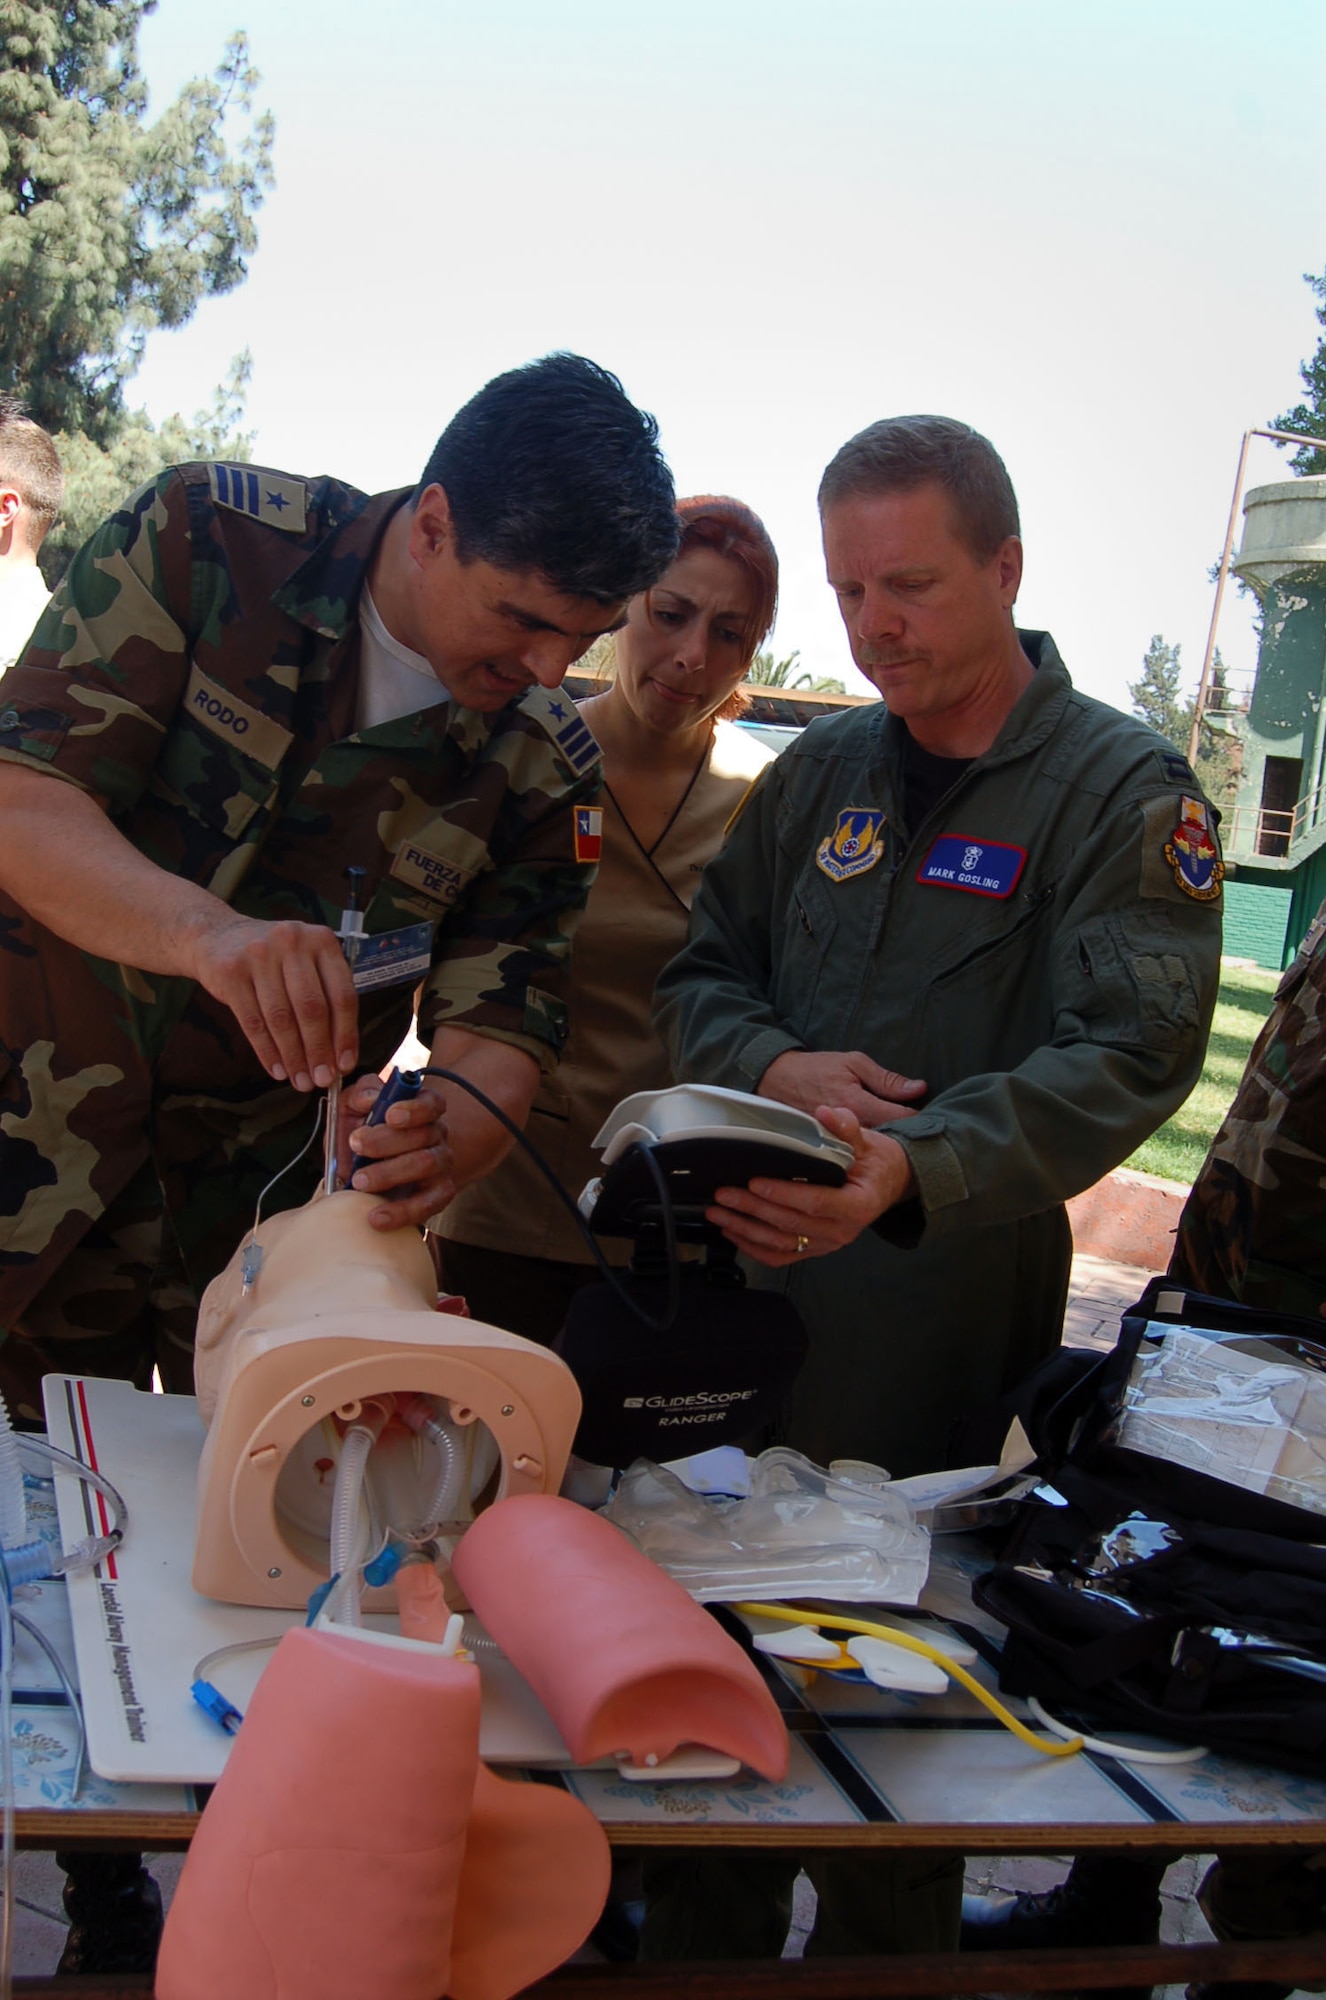 Lt. Col. Alger Rodo, the medical exchange coordinator for the Chilean Air Force, intubates, or inserts a tube into, the throat of a practice patient as U.S. Air Force Capt. Mark Gosling, from Brookes City-Base, San Antonio, instructs. Captain Gossling is part of about 70 Airmen participating in Operation Southern Partner, a Twelfth Air Force (Air Forces Southern) led event aimed at providing intensive, periodic subject-matter exchanges in the U.S. Southern Command area of focus, started Oct. 26. (Air Force photo/Master Sgt. Eric M. Grill)